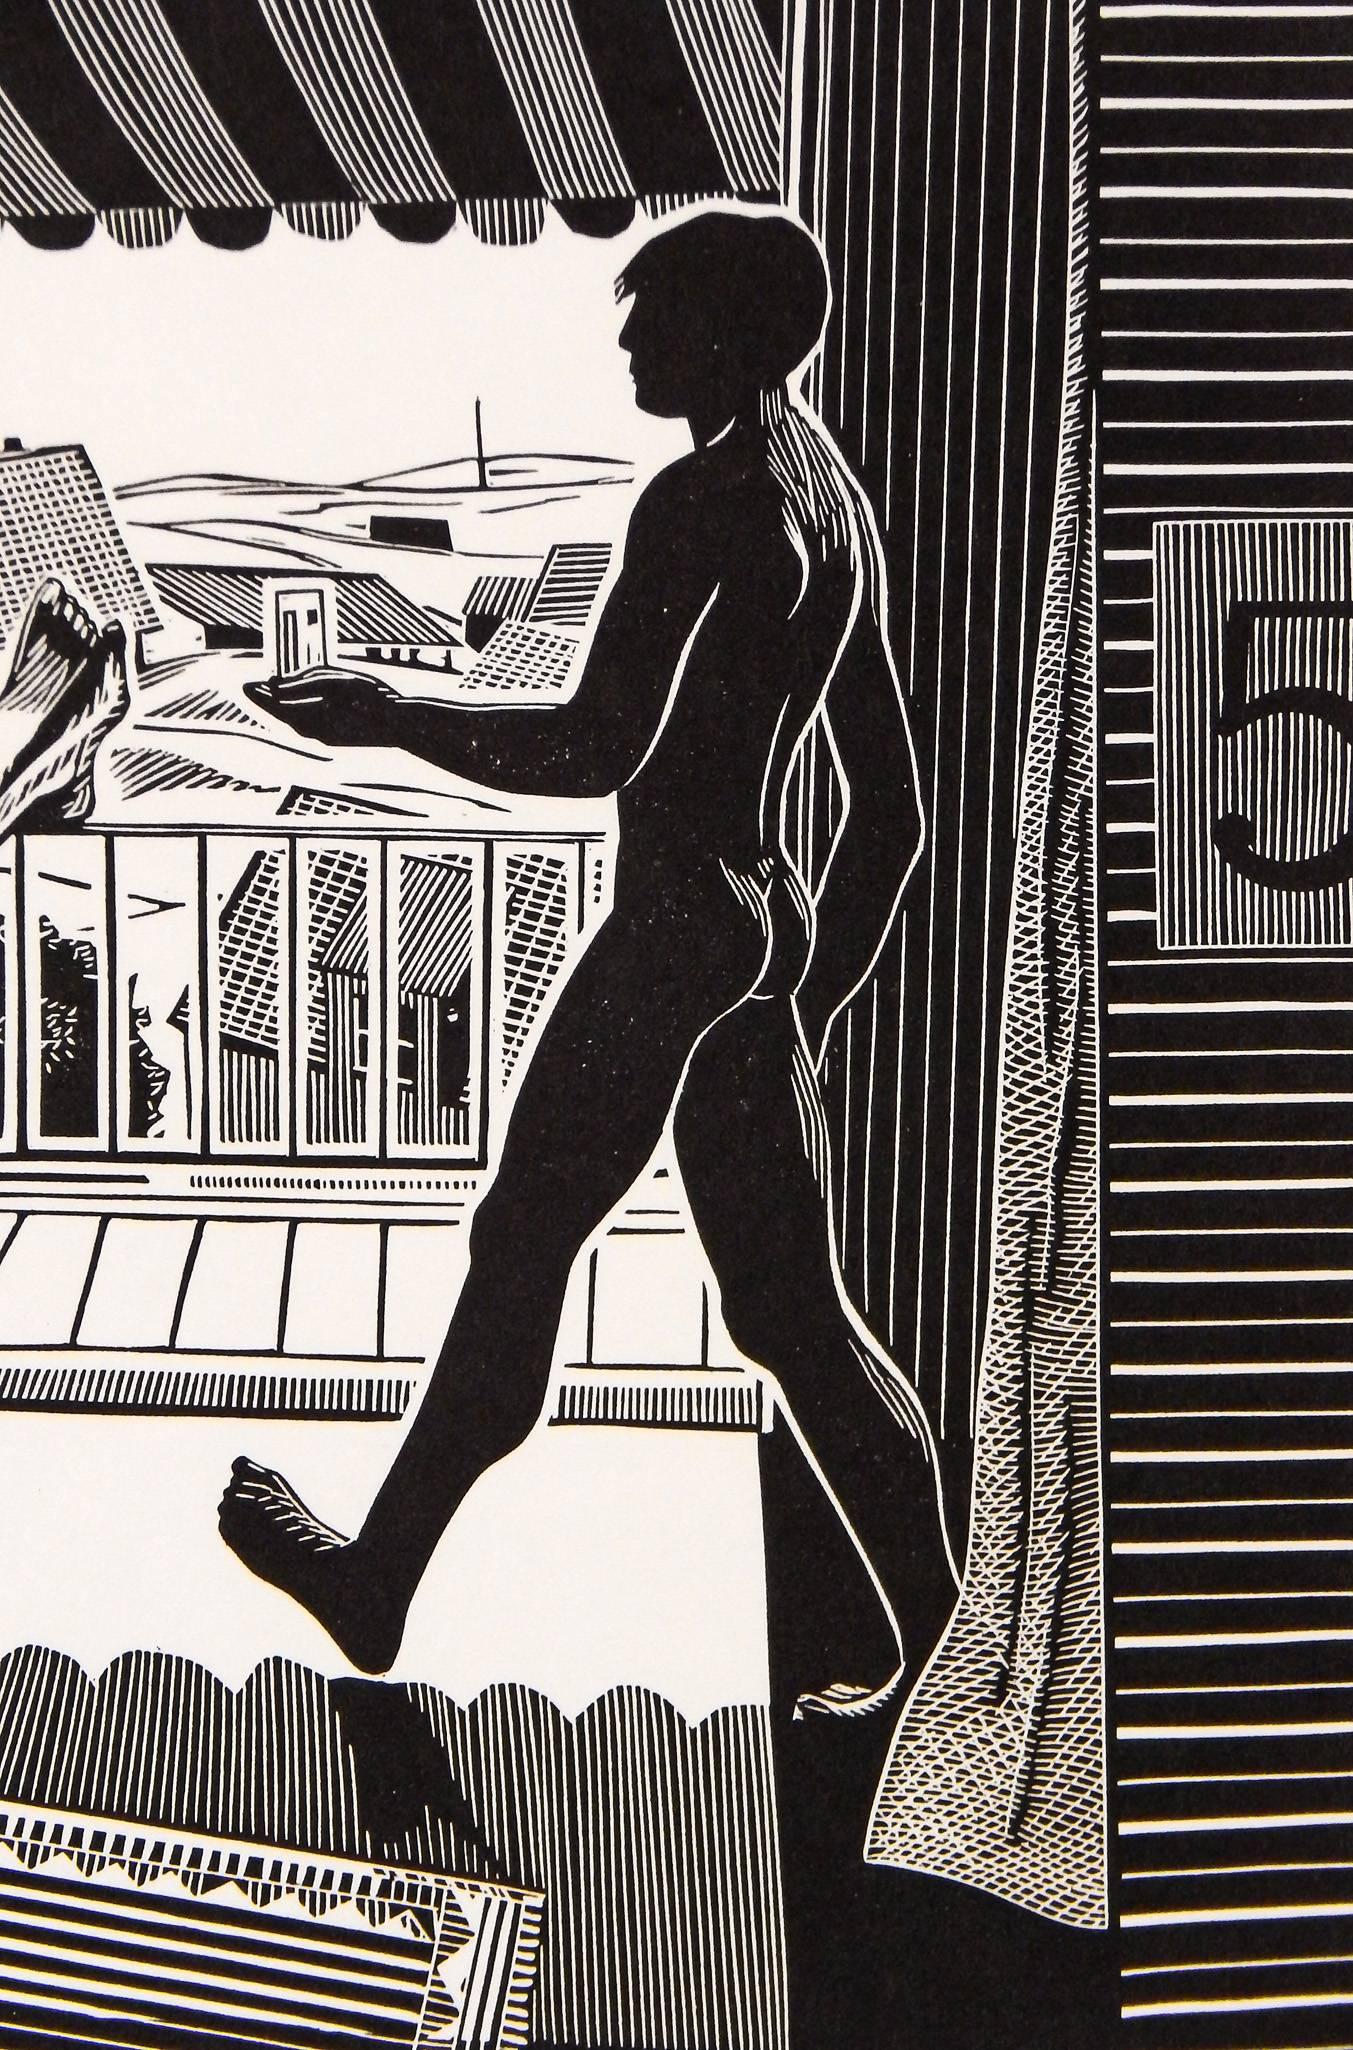 Fresh and crisp, this depiction of a nude male figure, in the cool shadows of a beachside home, delivering a cold drink in a tall glass to his friend or lover, is a calm and relaxed depiction of life away from the demands of home and work. The Stark